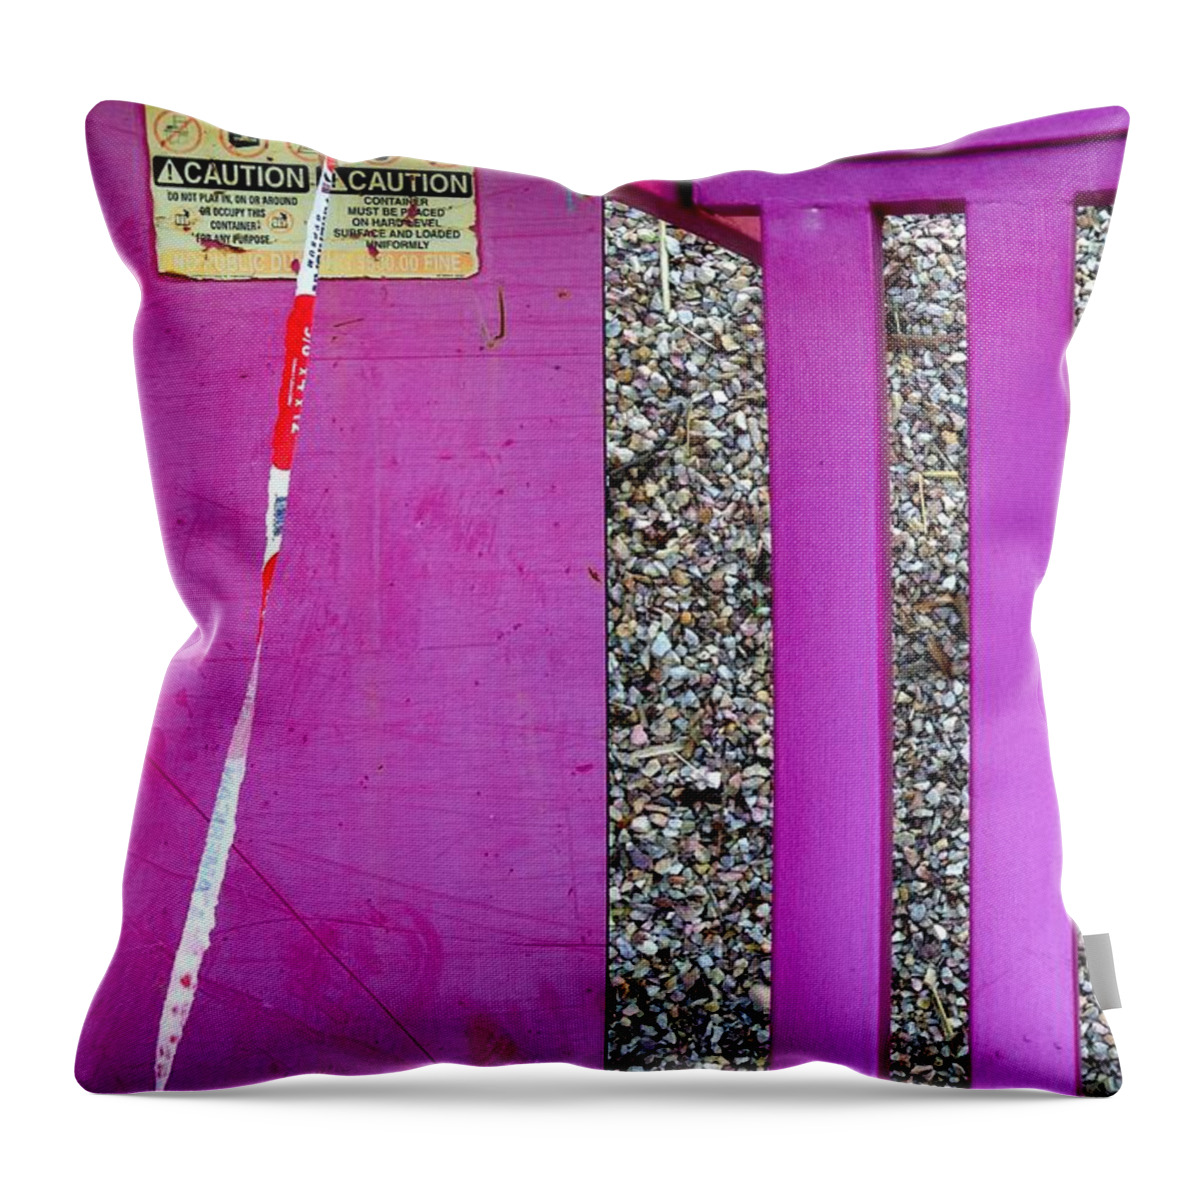  Abstract Throw Pillow featuring the photograph Street Sights 31 by Marlene Burns